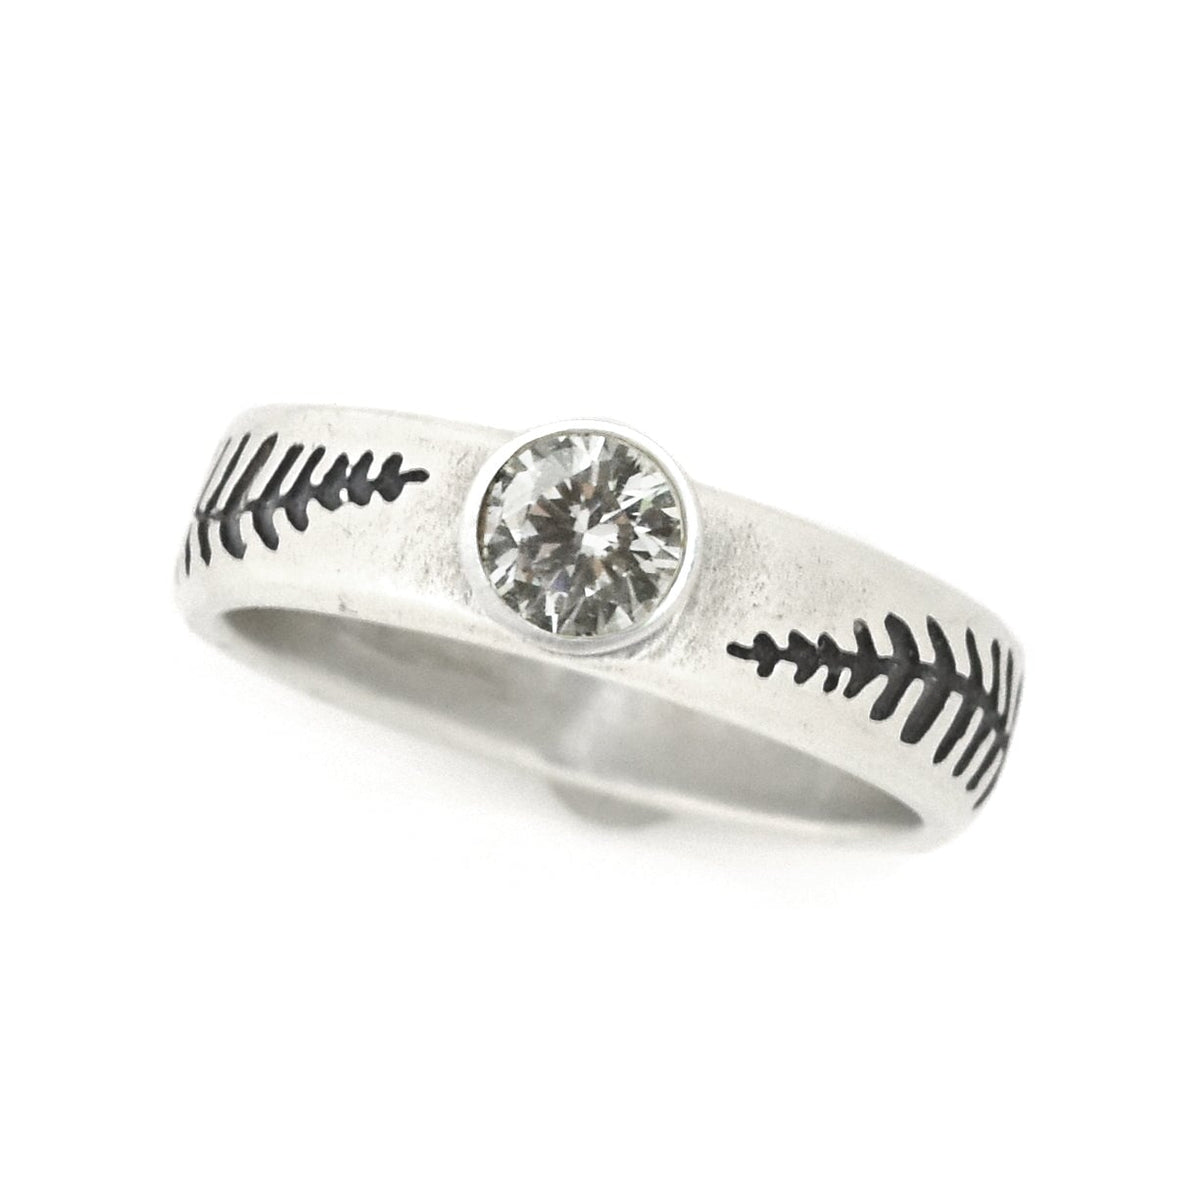 Sparkling Fond Fern Ring - your choice of 5mm stone - Wedding Ring Moissanite Recycled Diamond 6981 - handmade by Beth Millner Jewelry